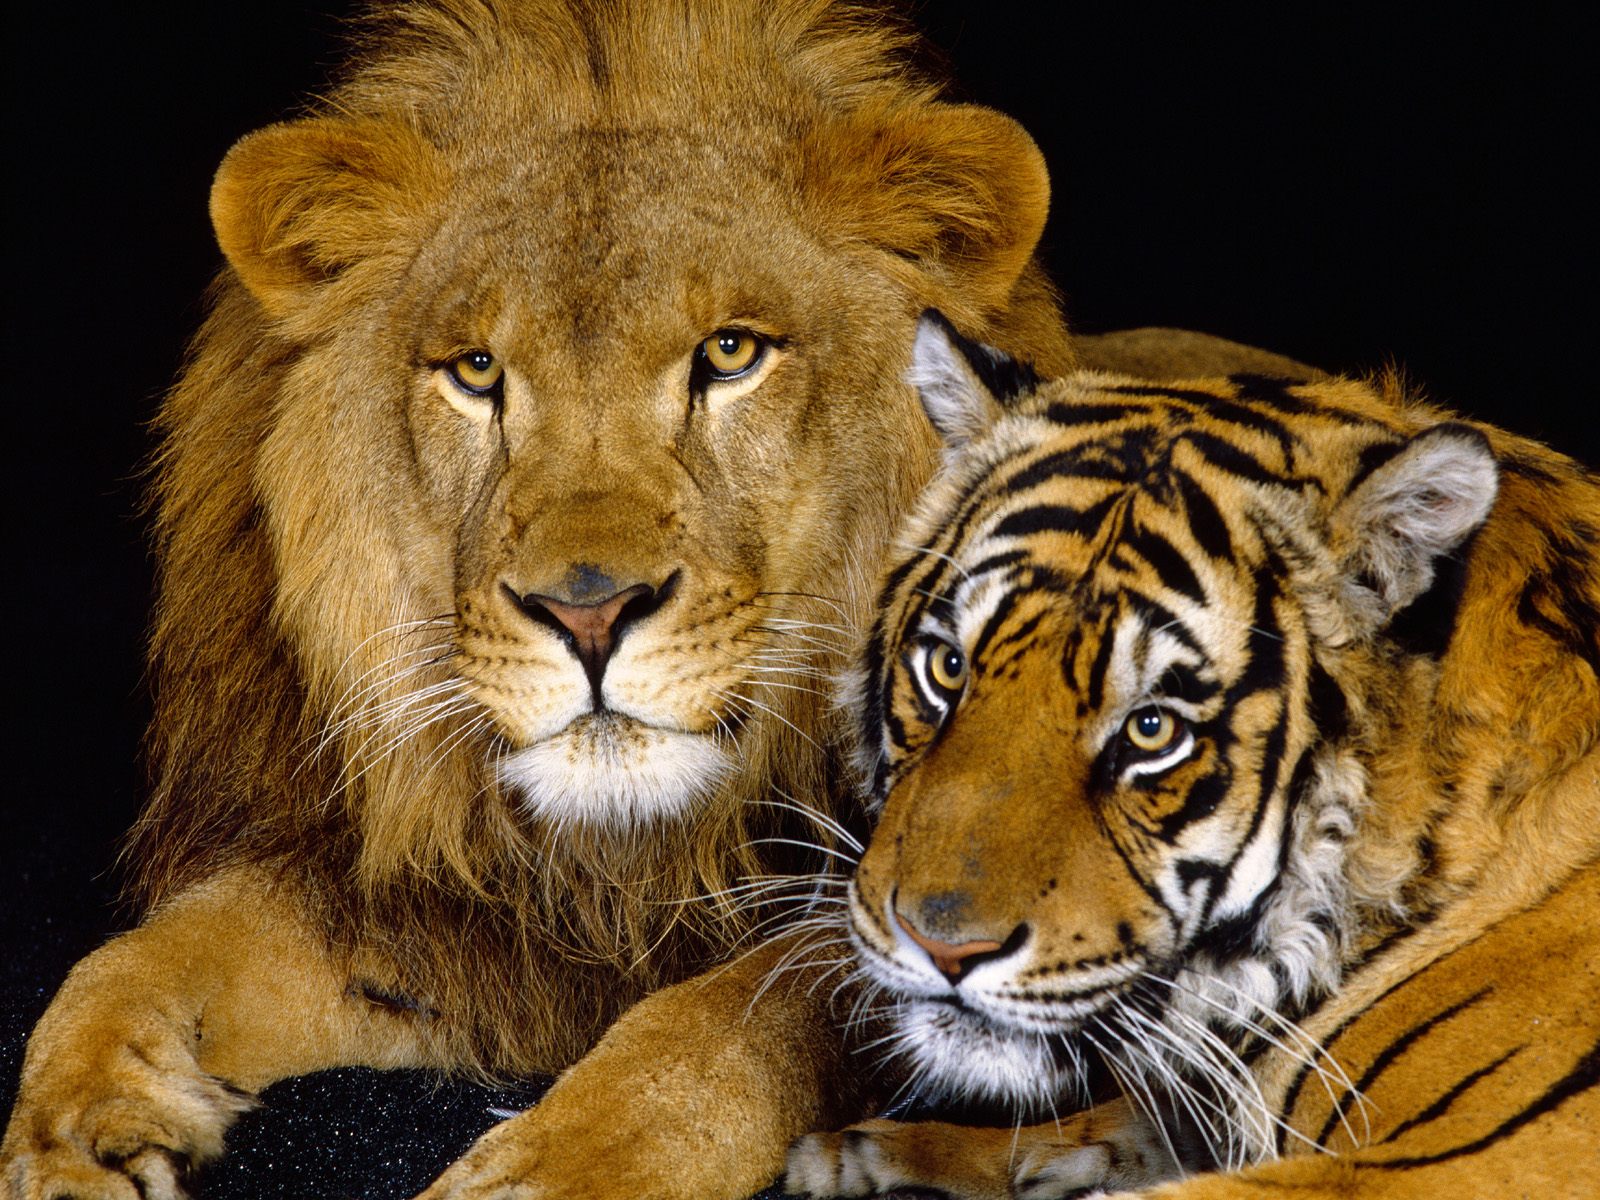 Tiger and Lion Animals